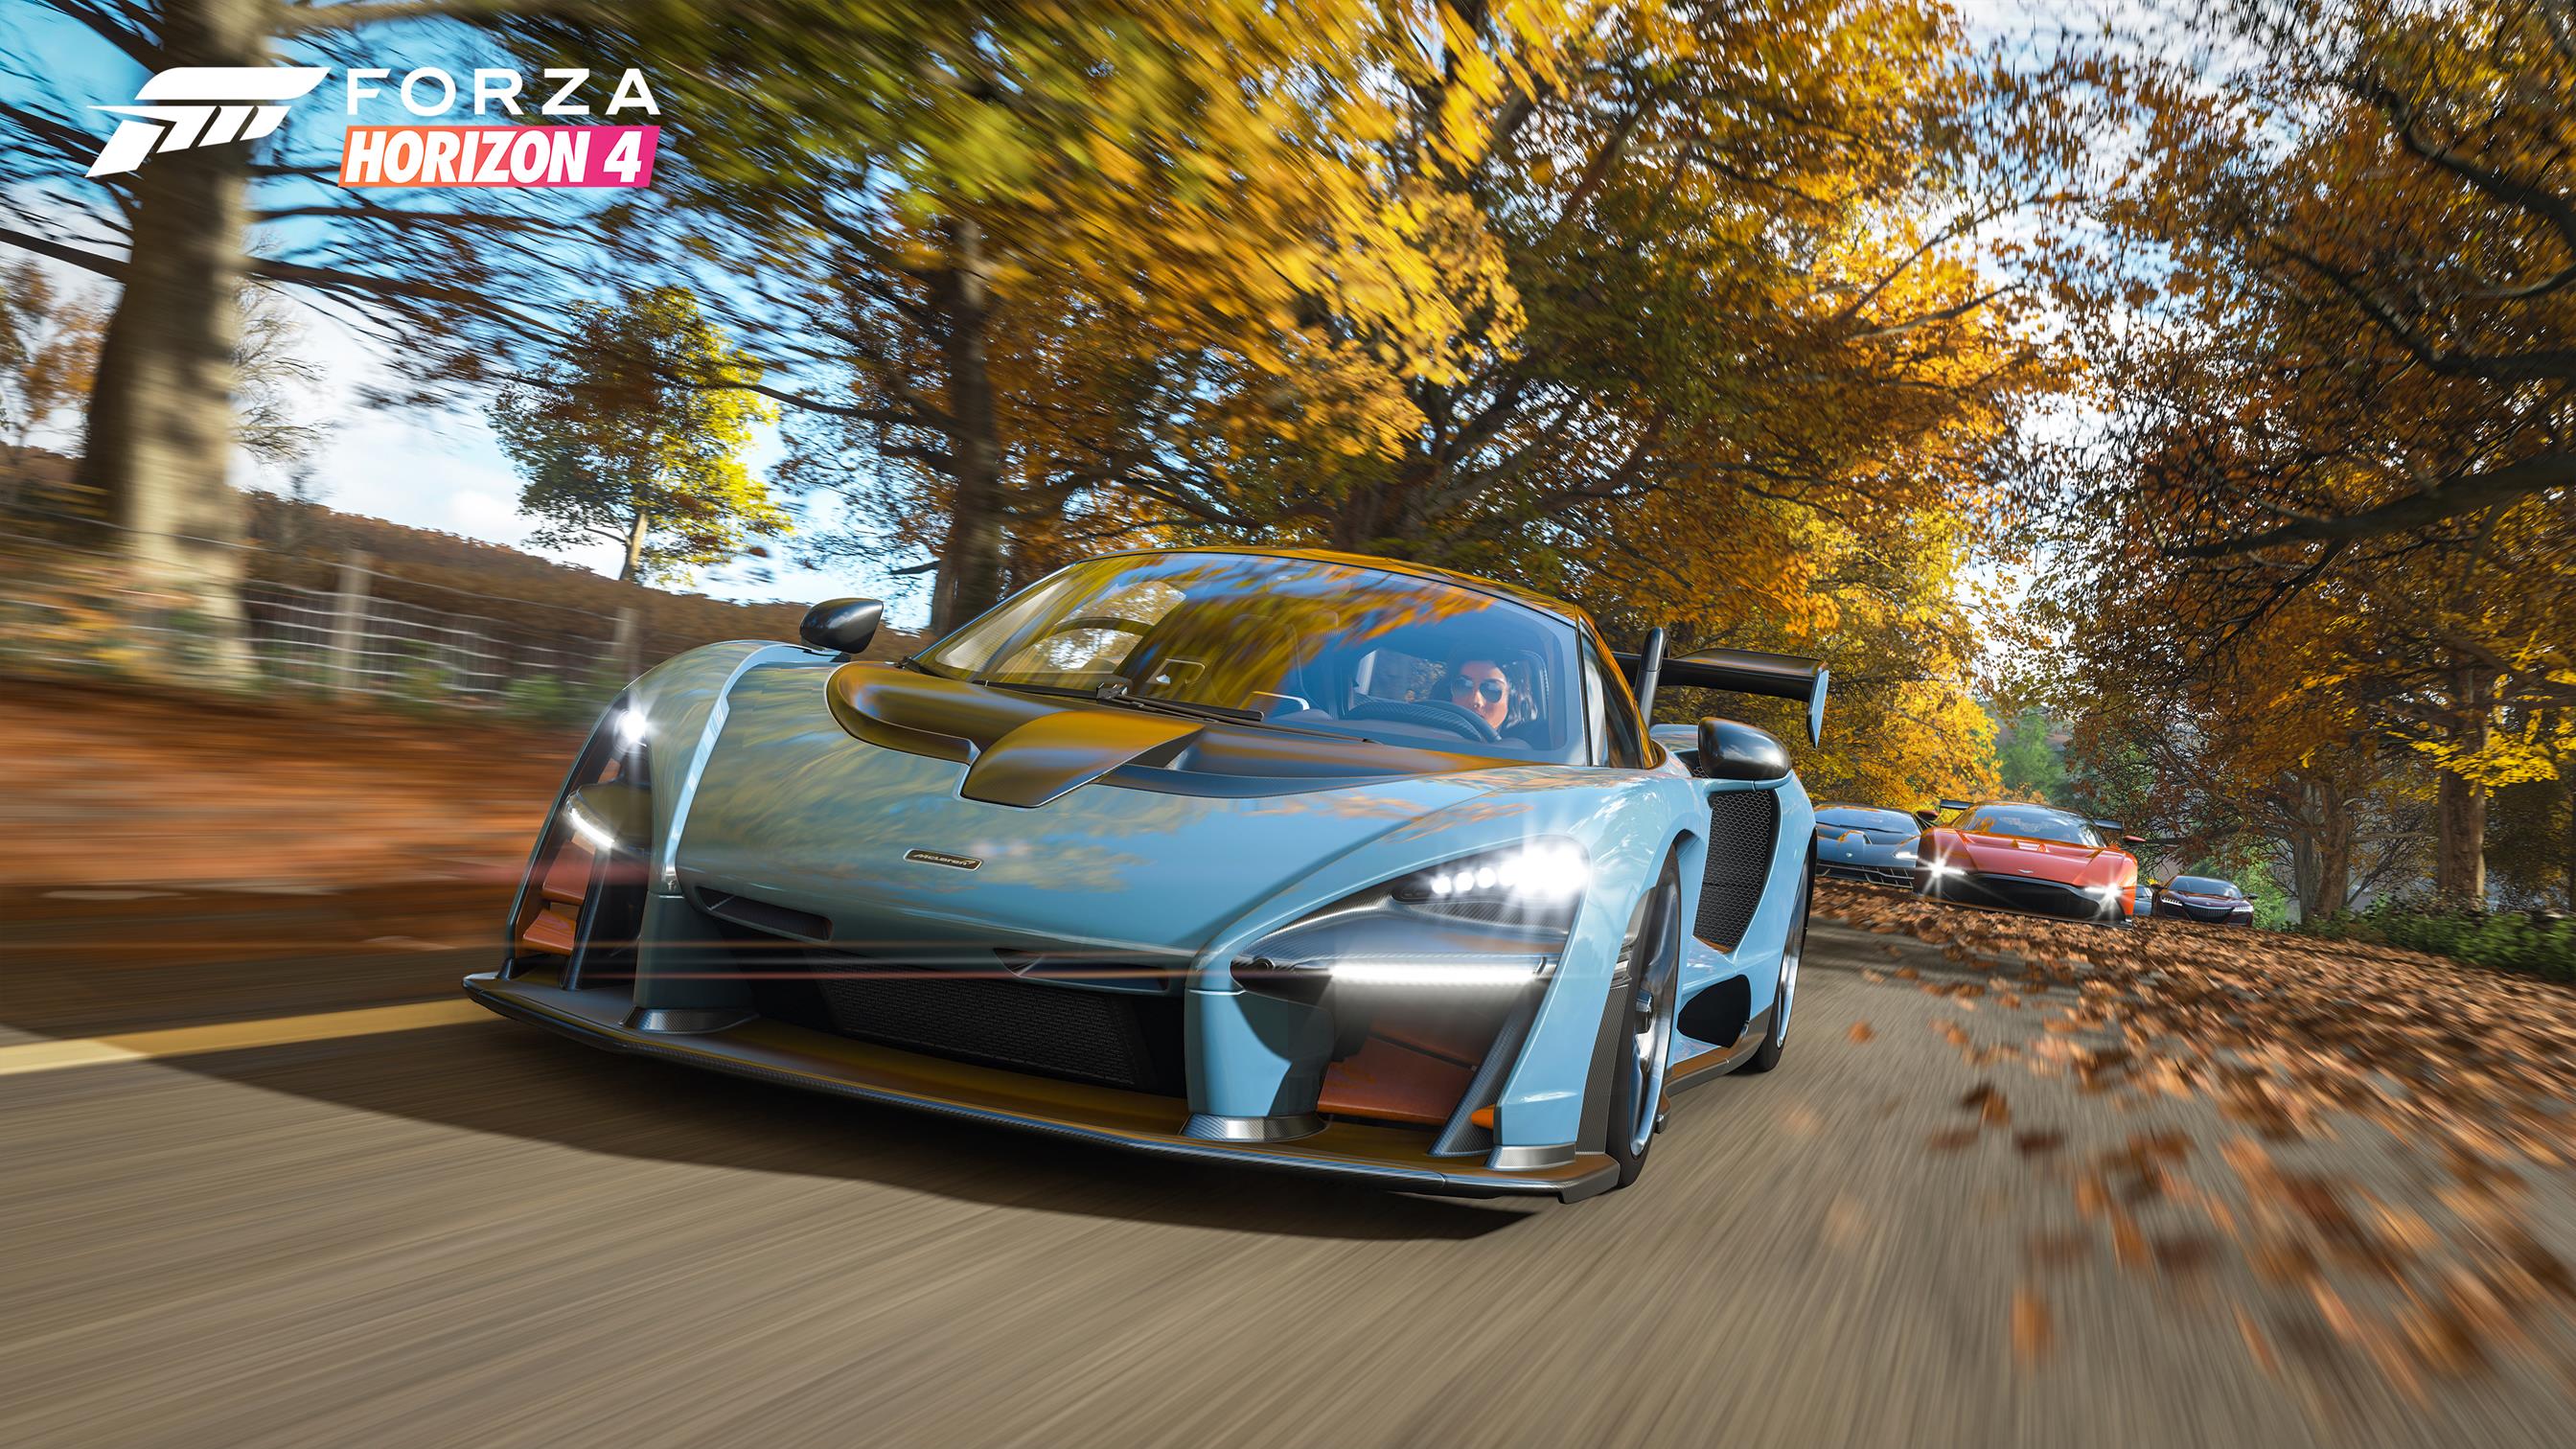 Image for Forza Horizon 4's second gameplay livestream scheduled for Tuesday